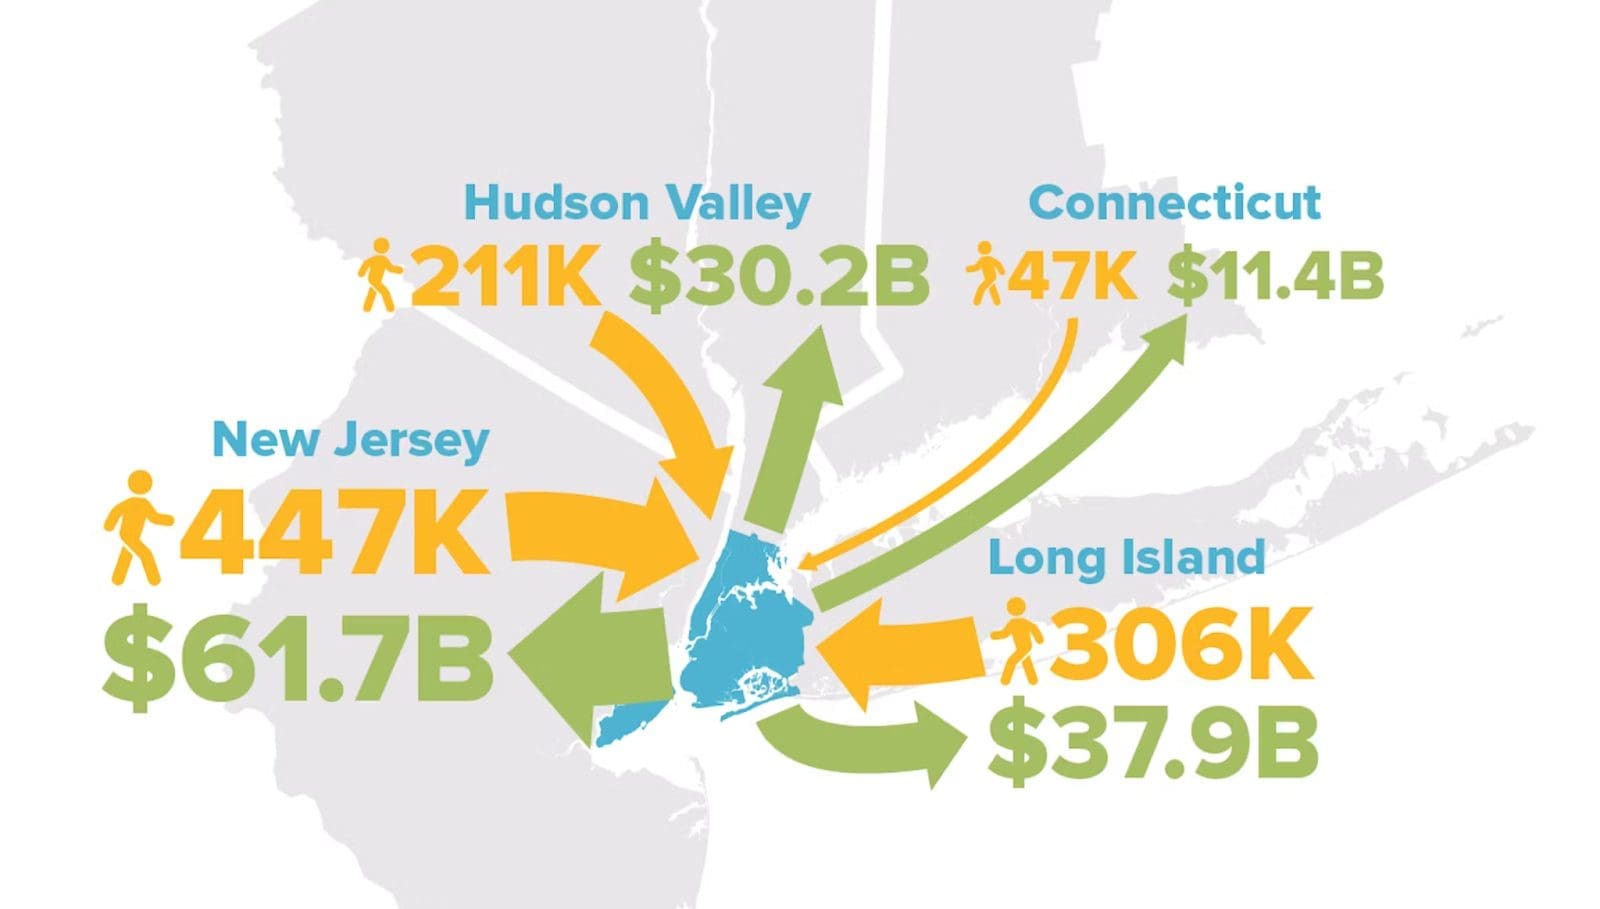 A graphic showing the numbers of commuters and revenue in the tri-state area